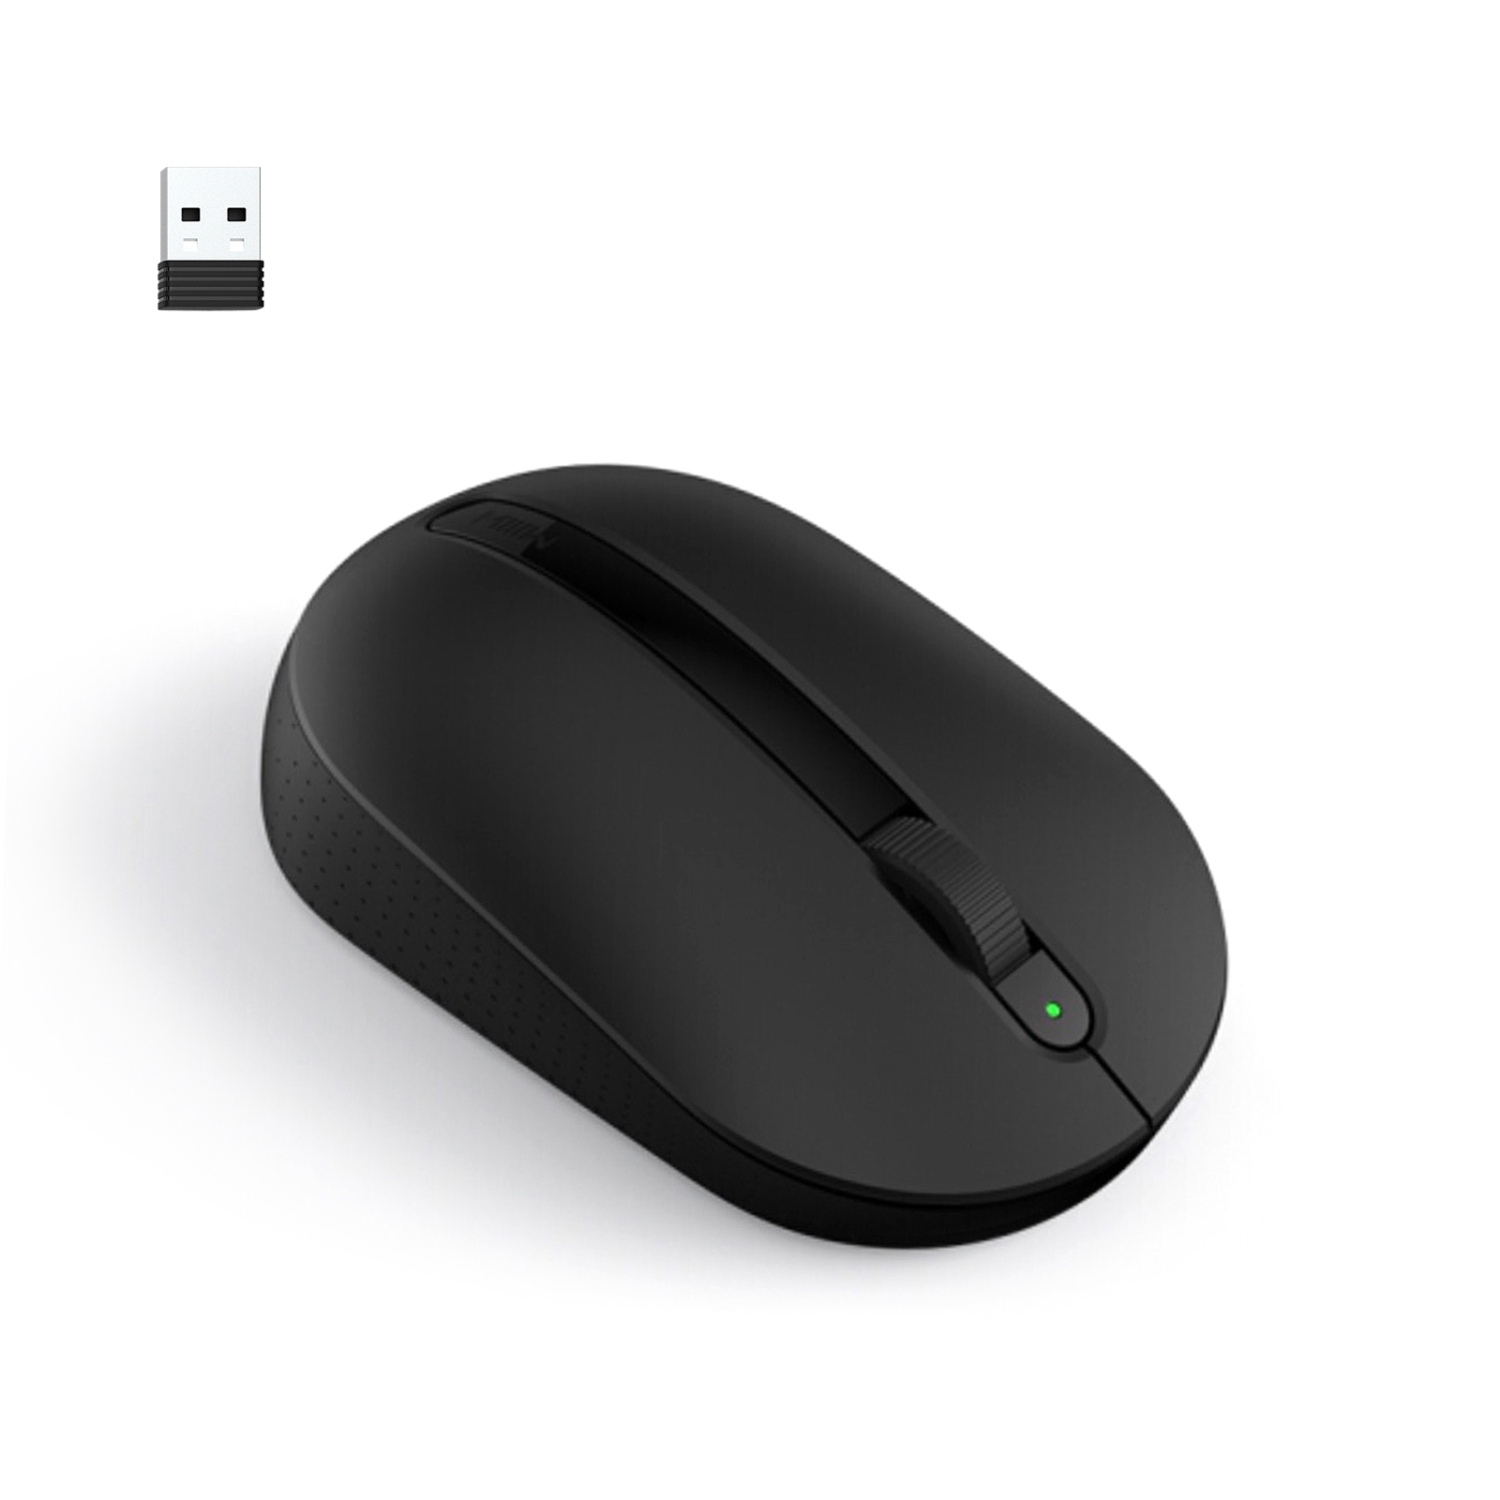 XIAOMI MIIIW M05 Wireless Mouse with USB Nano Receiver, 1000 DPI, Batteries Included, Black